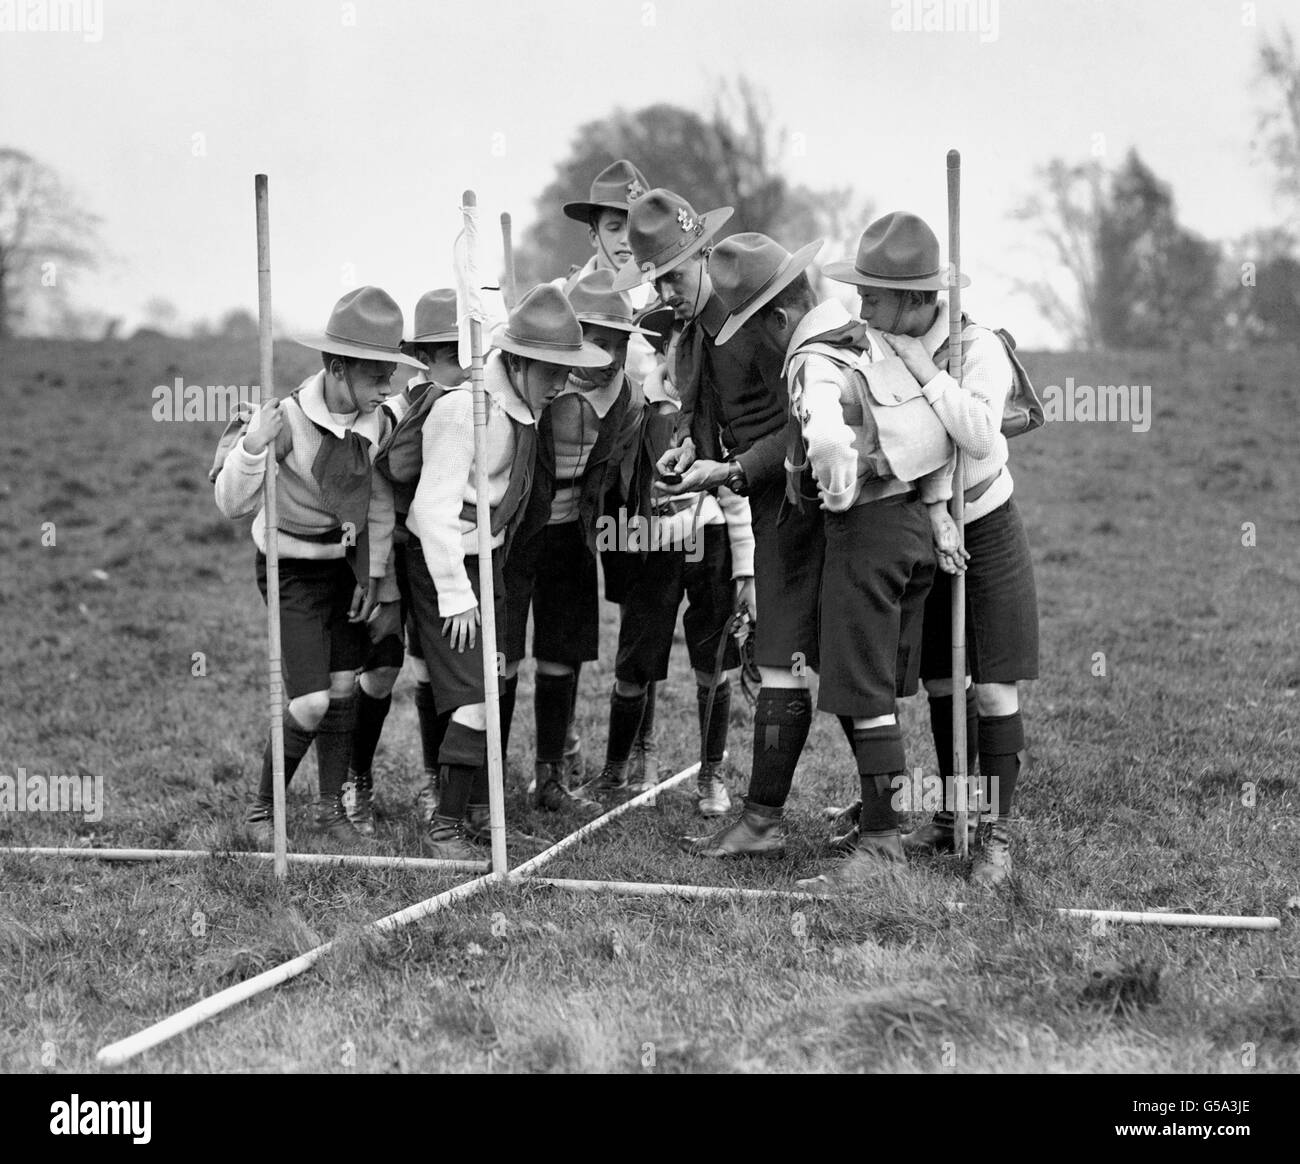 1910: A group of Boy Scouts listen intently to their Scout leader as he instructs them in the art of taking a compass bearing. Stock Photo